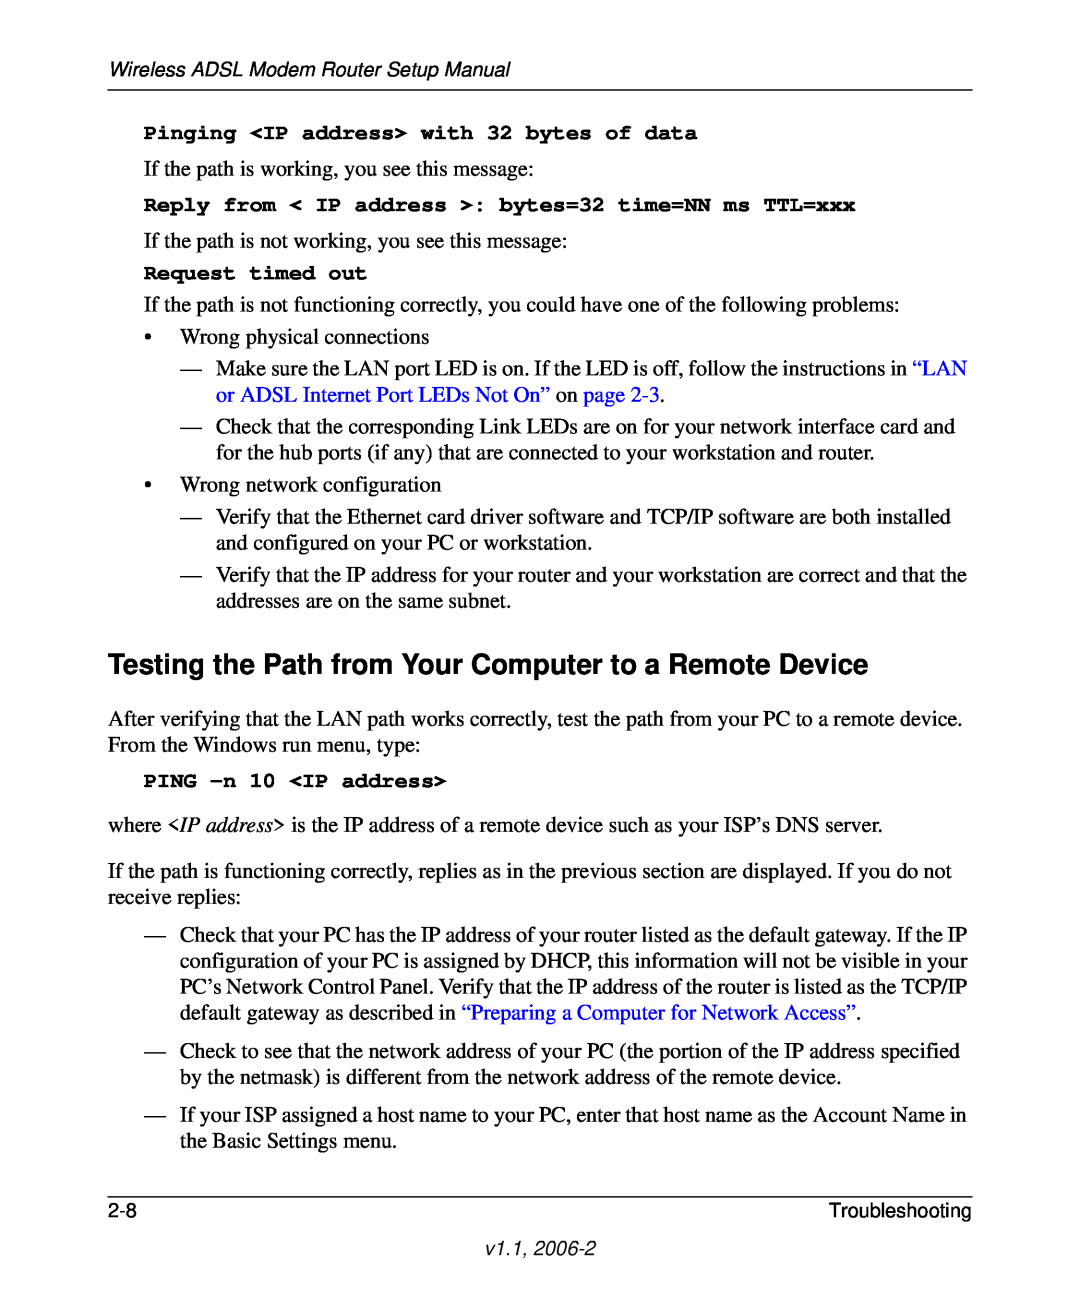 NETGEAR Wireless ADSL Modem Router manual Testing the Path from Your Computer to a Remote Device, Request timed out 